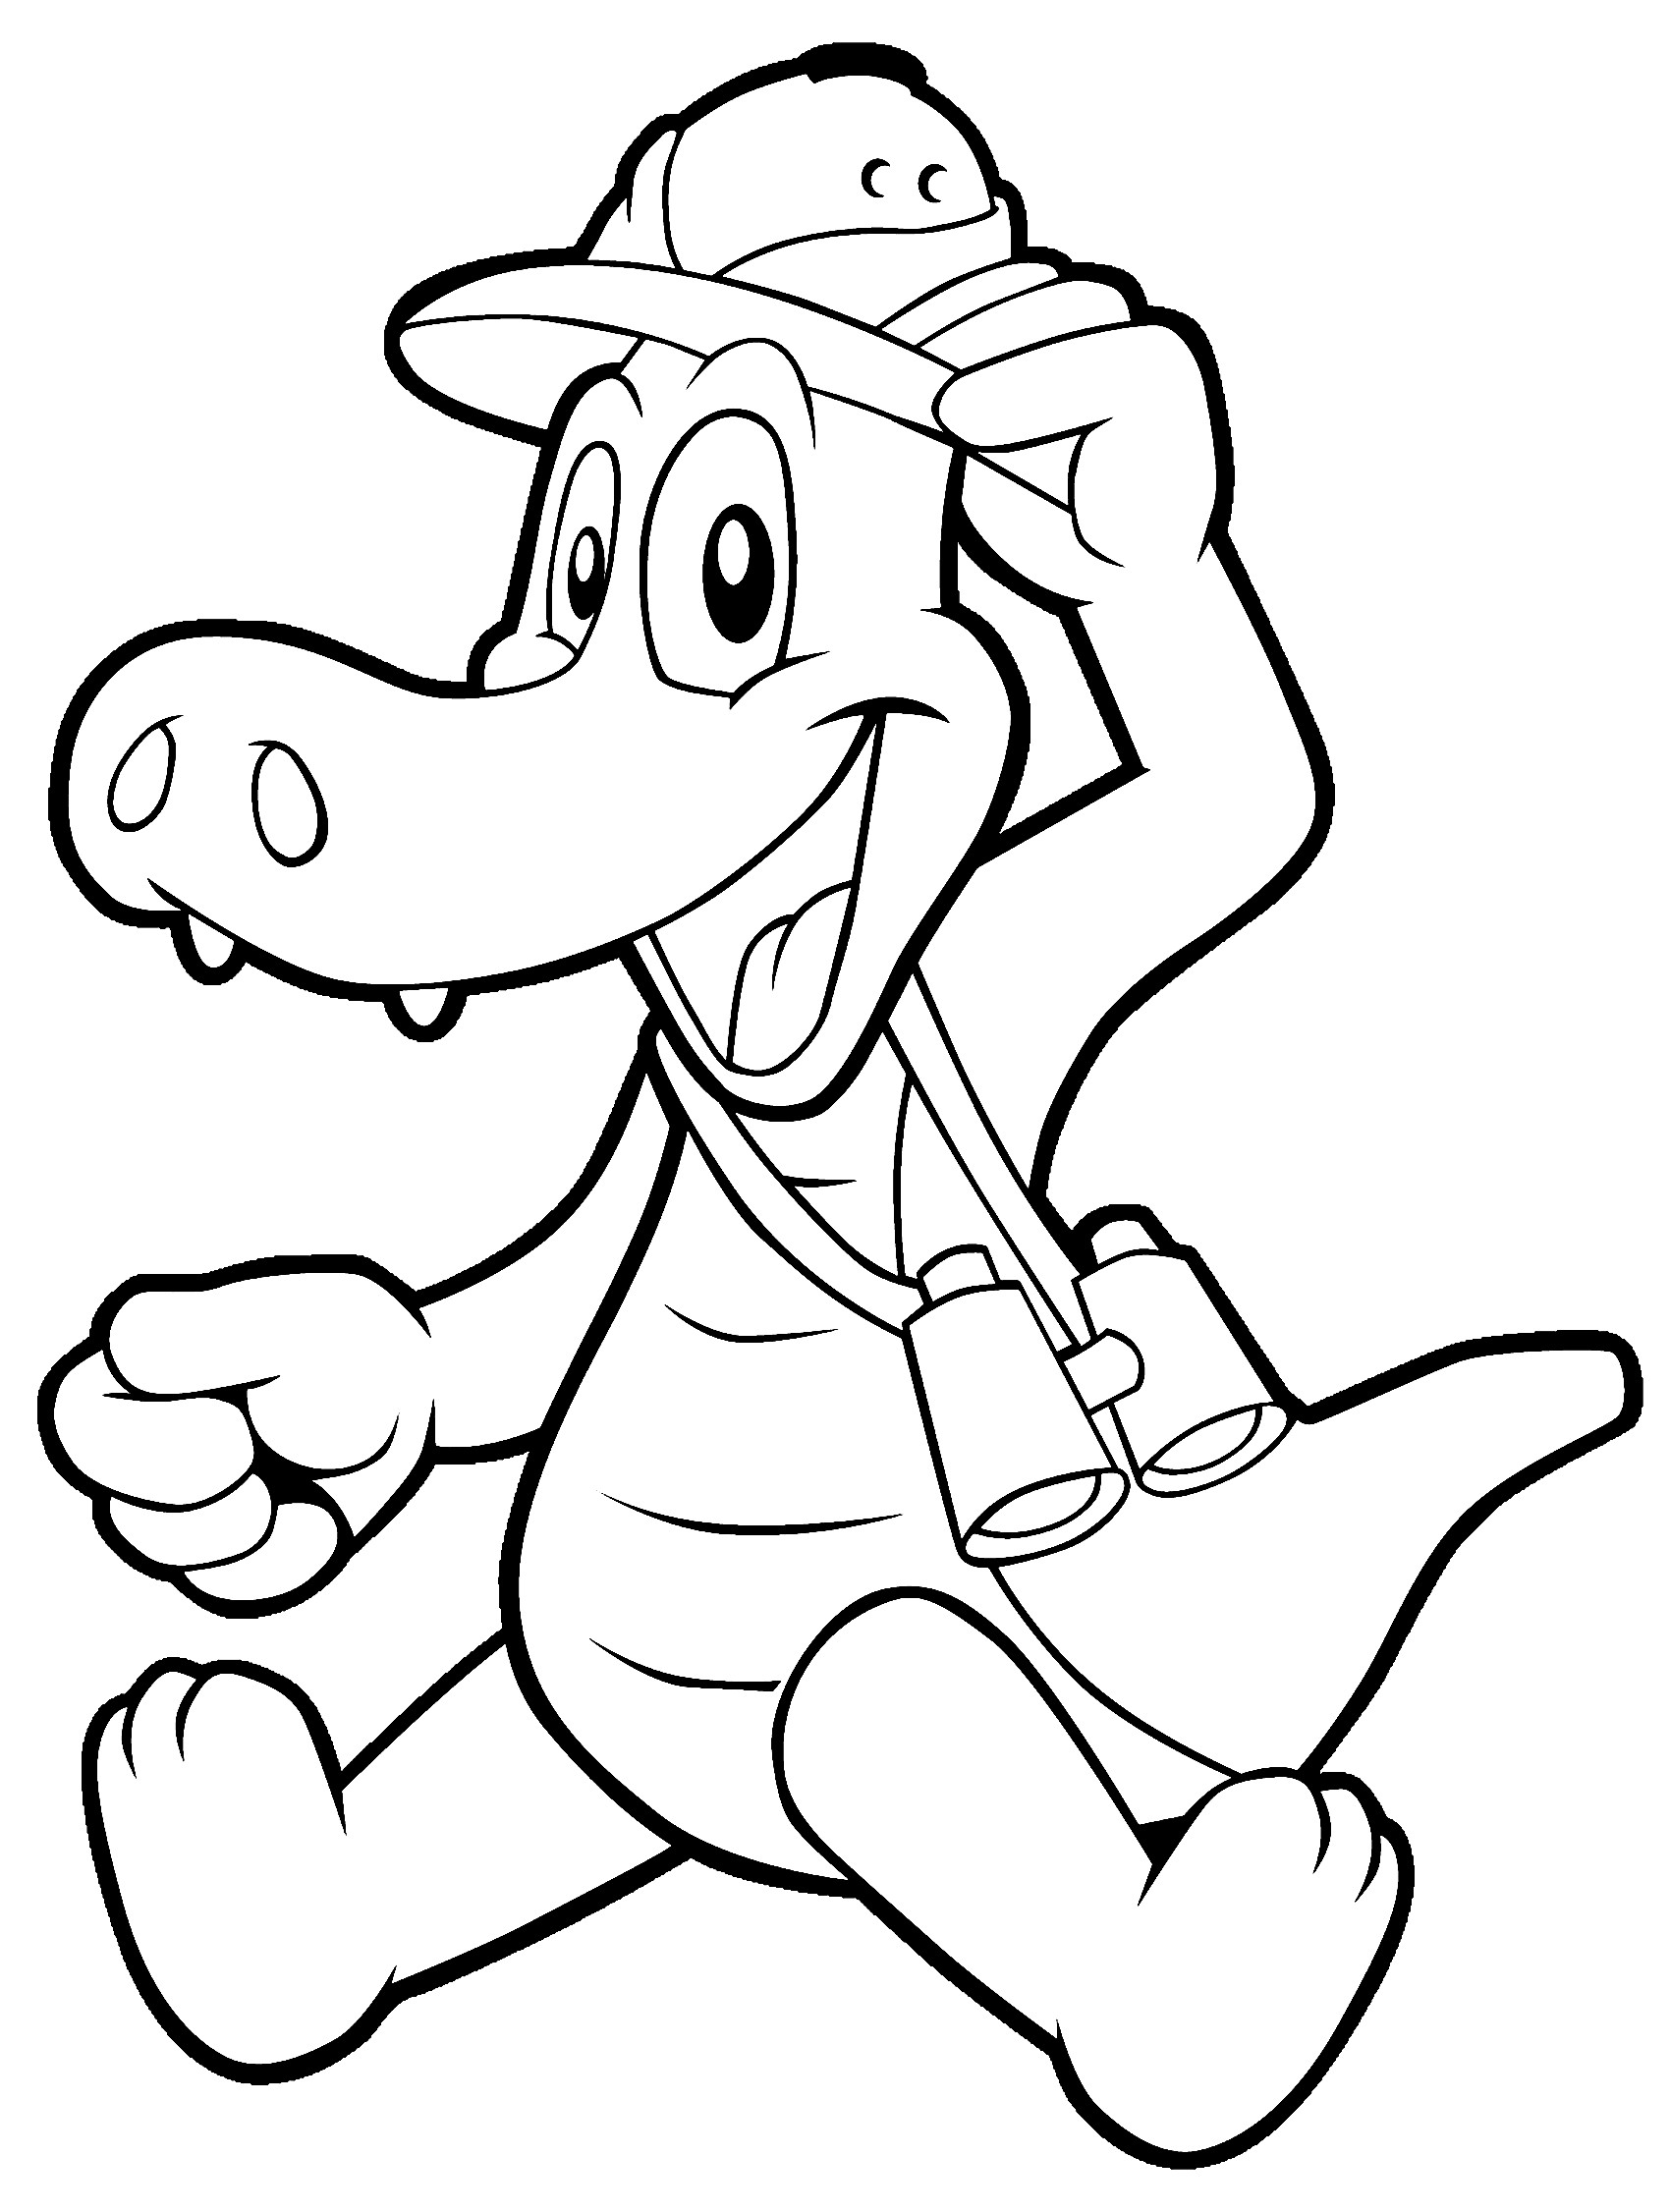 Coloring Page of a Cute Birdwatching Alligator